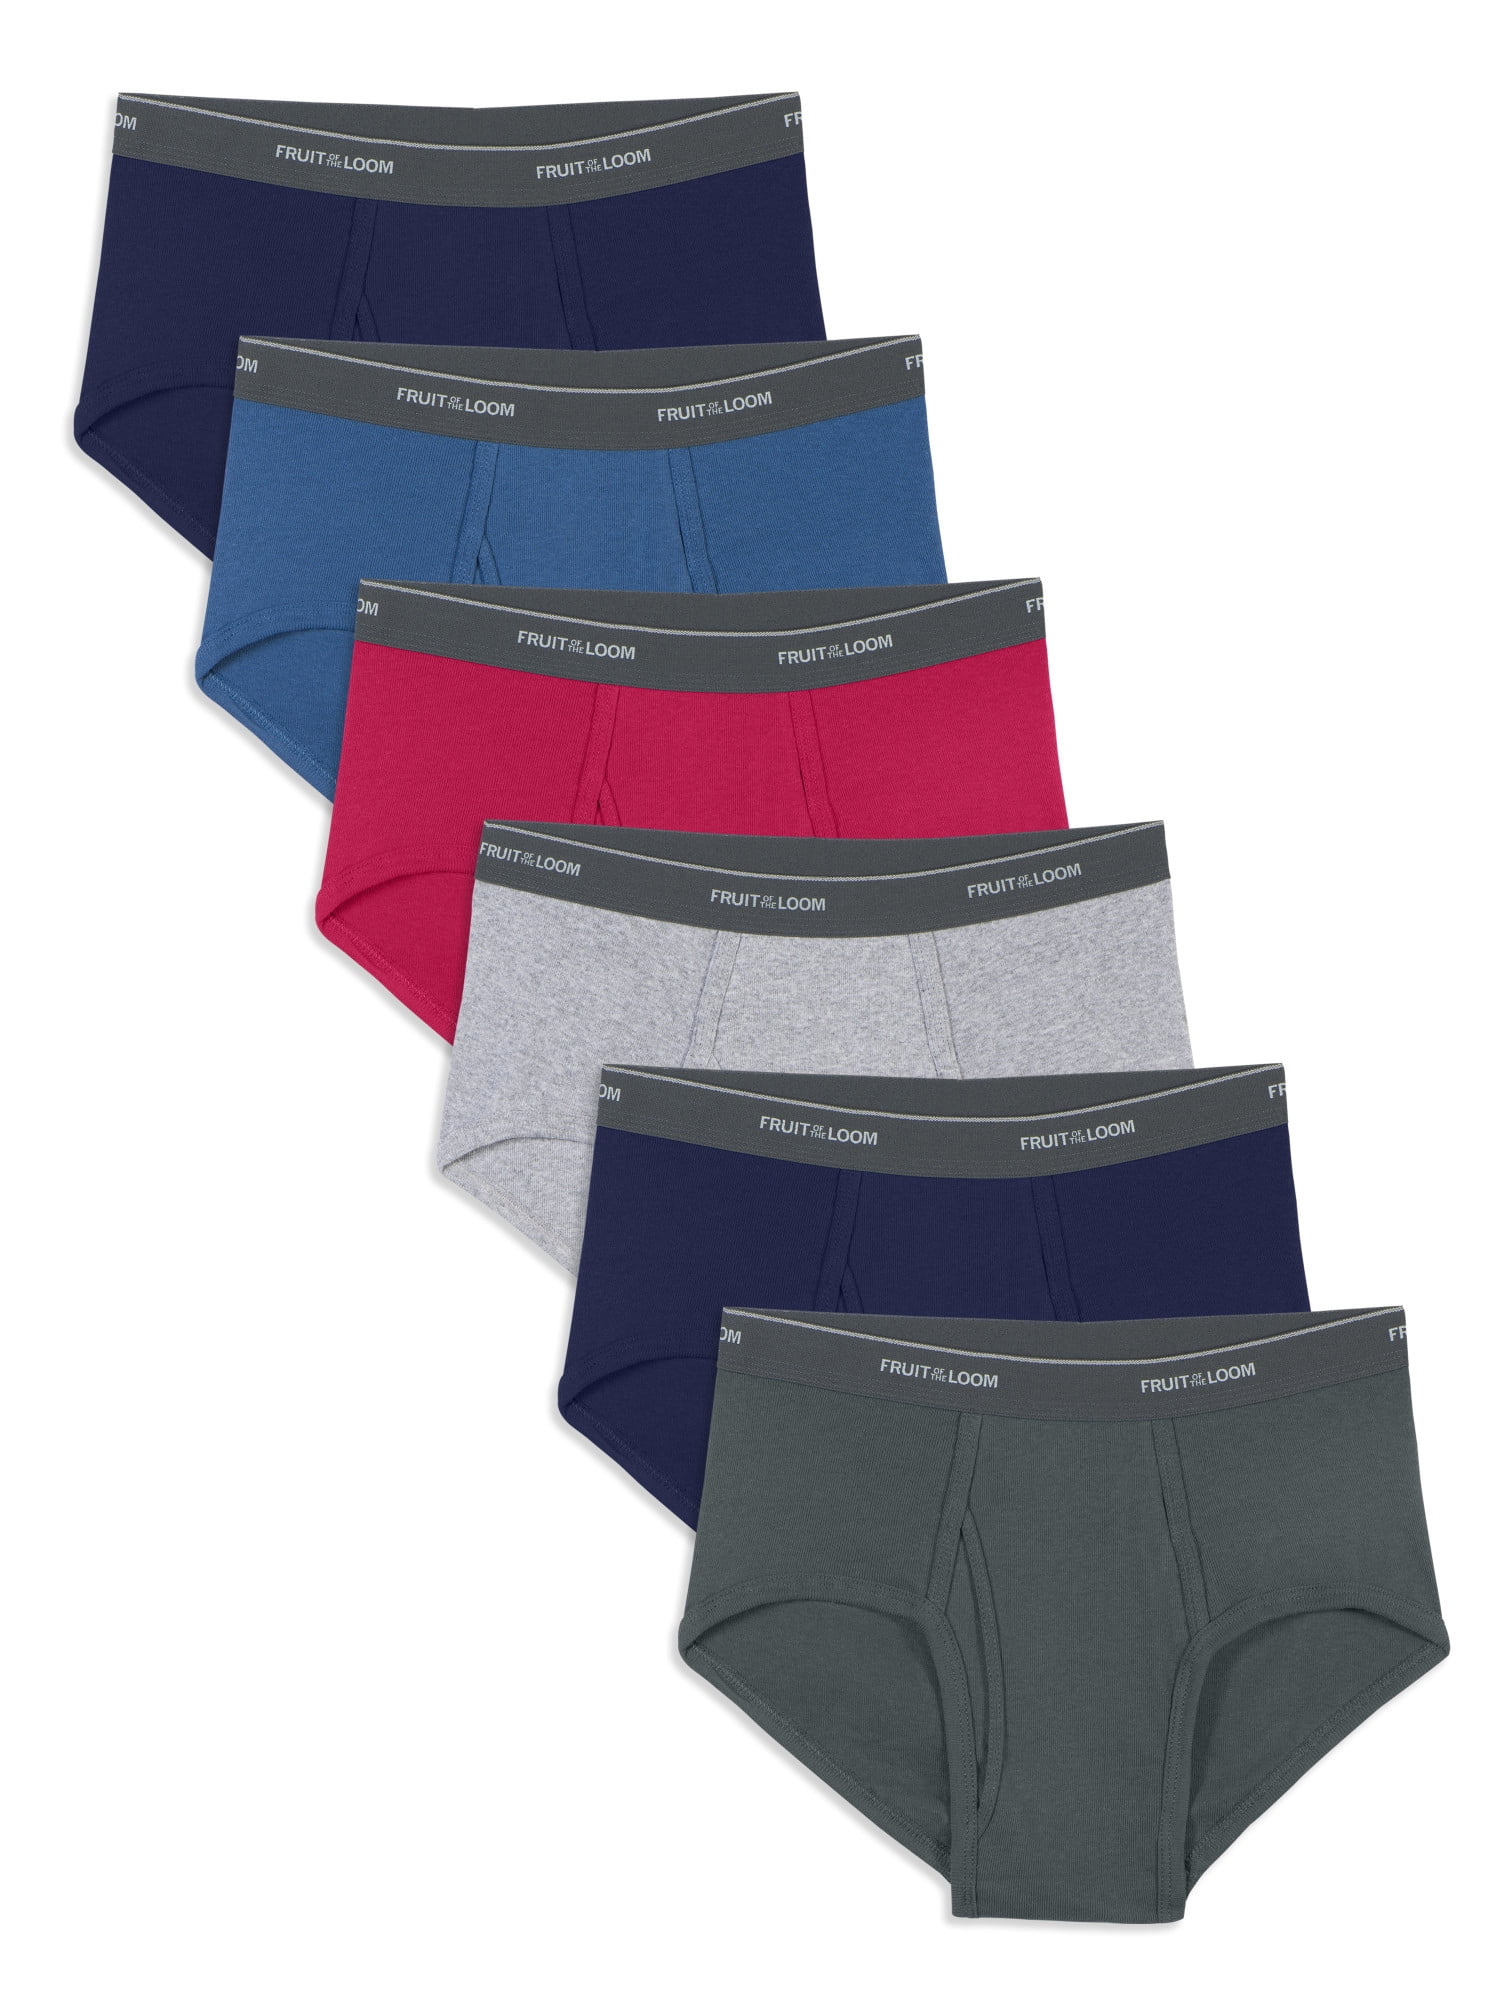 Fruit of the Loom Mens Boxer Briefs Pack of 4 